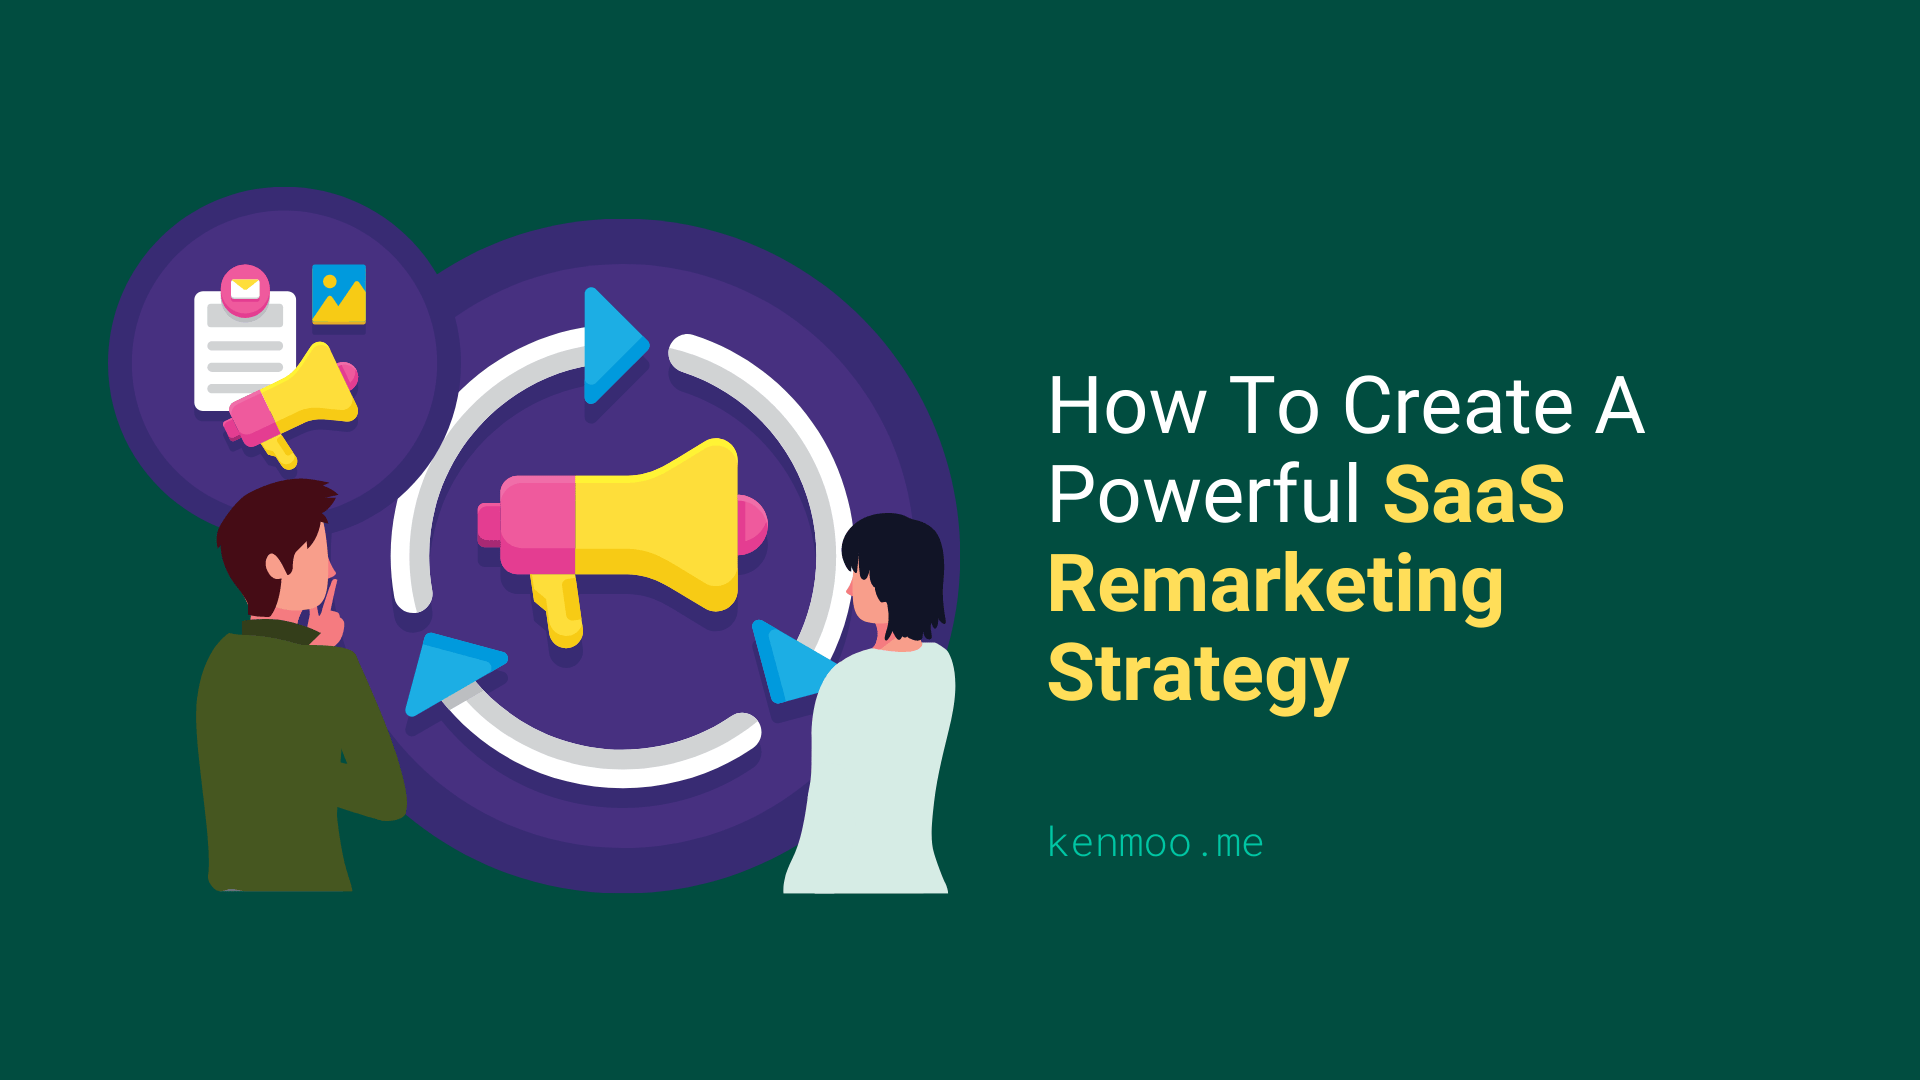 How To Create A Powerful SaaS Remarketing Strategy